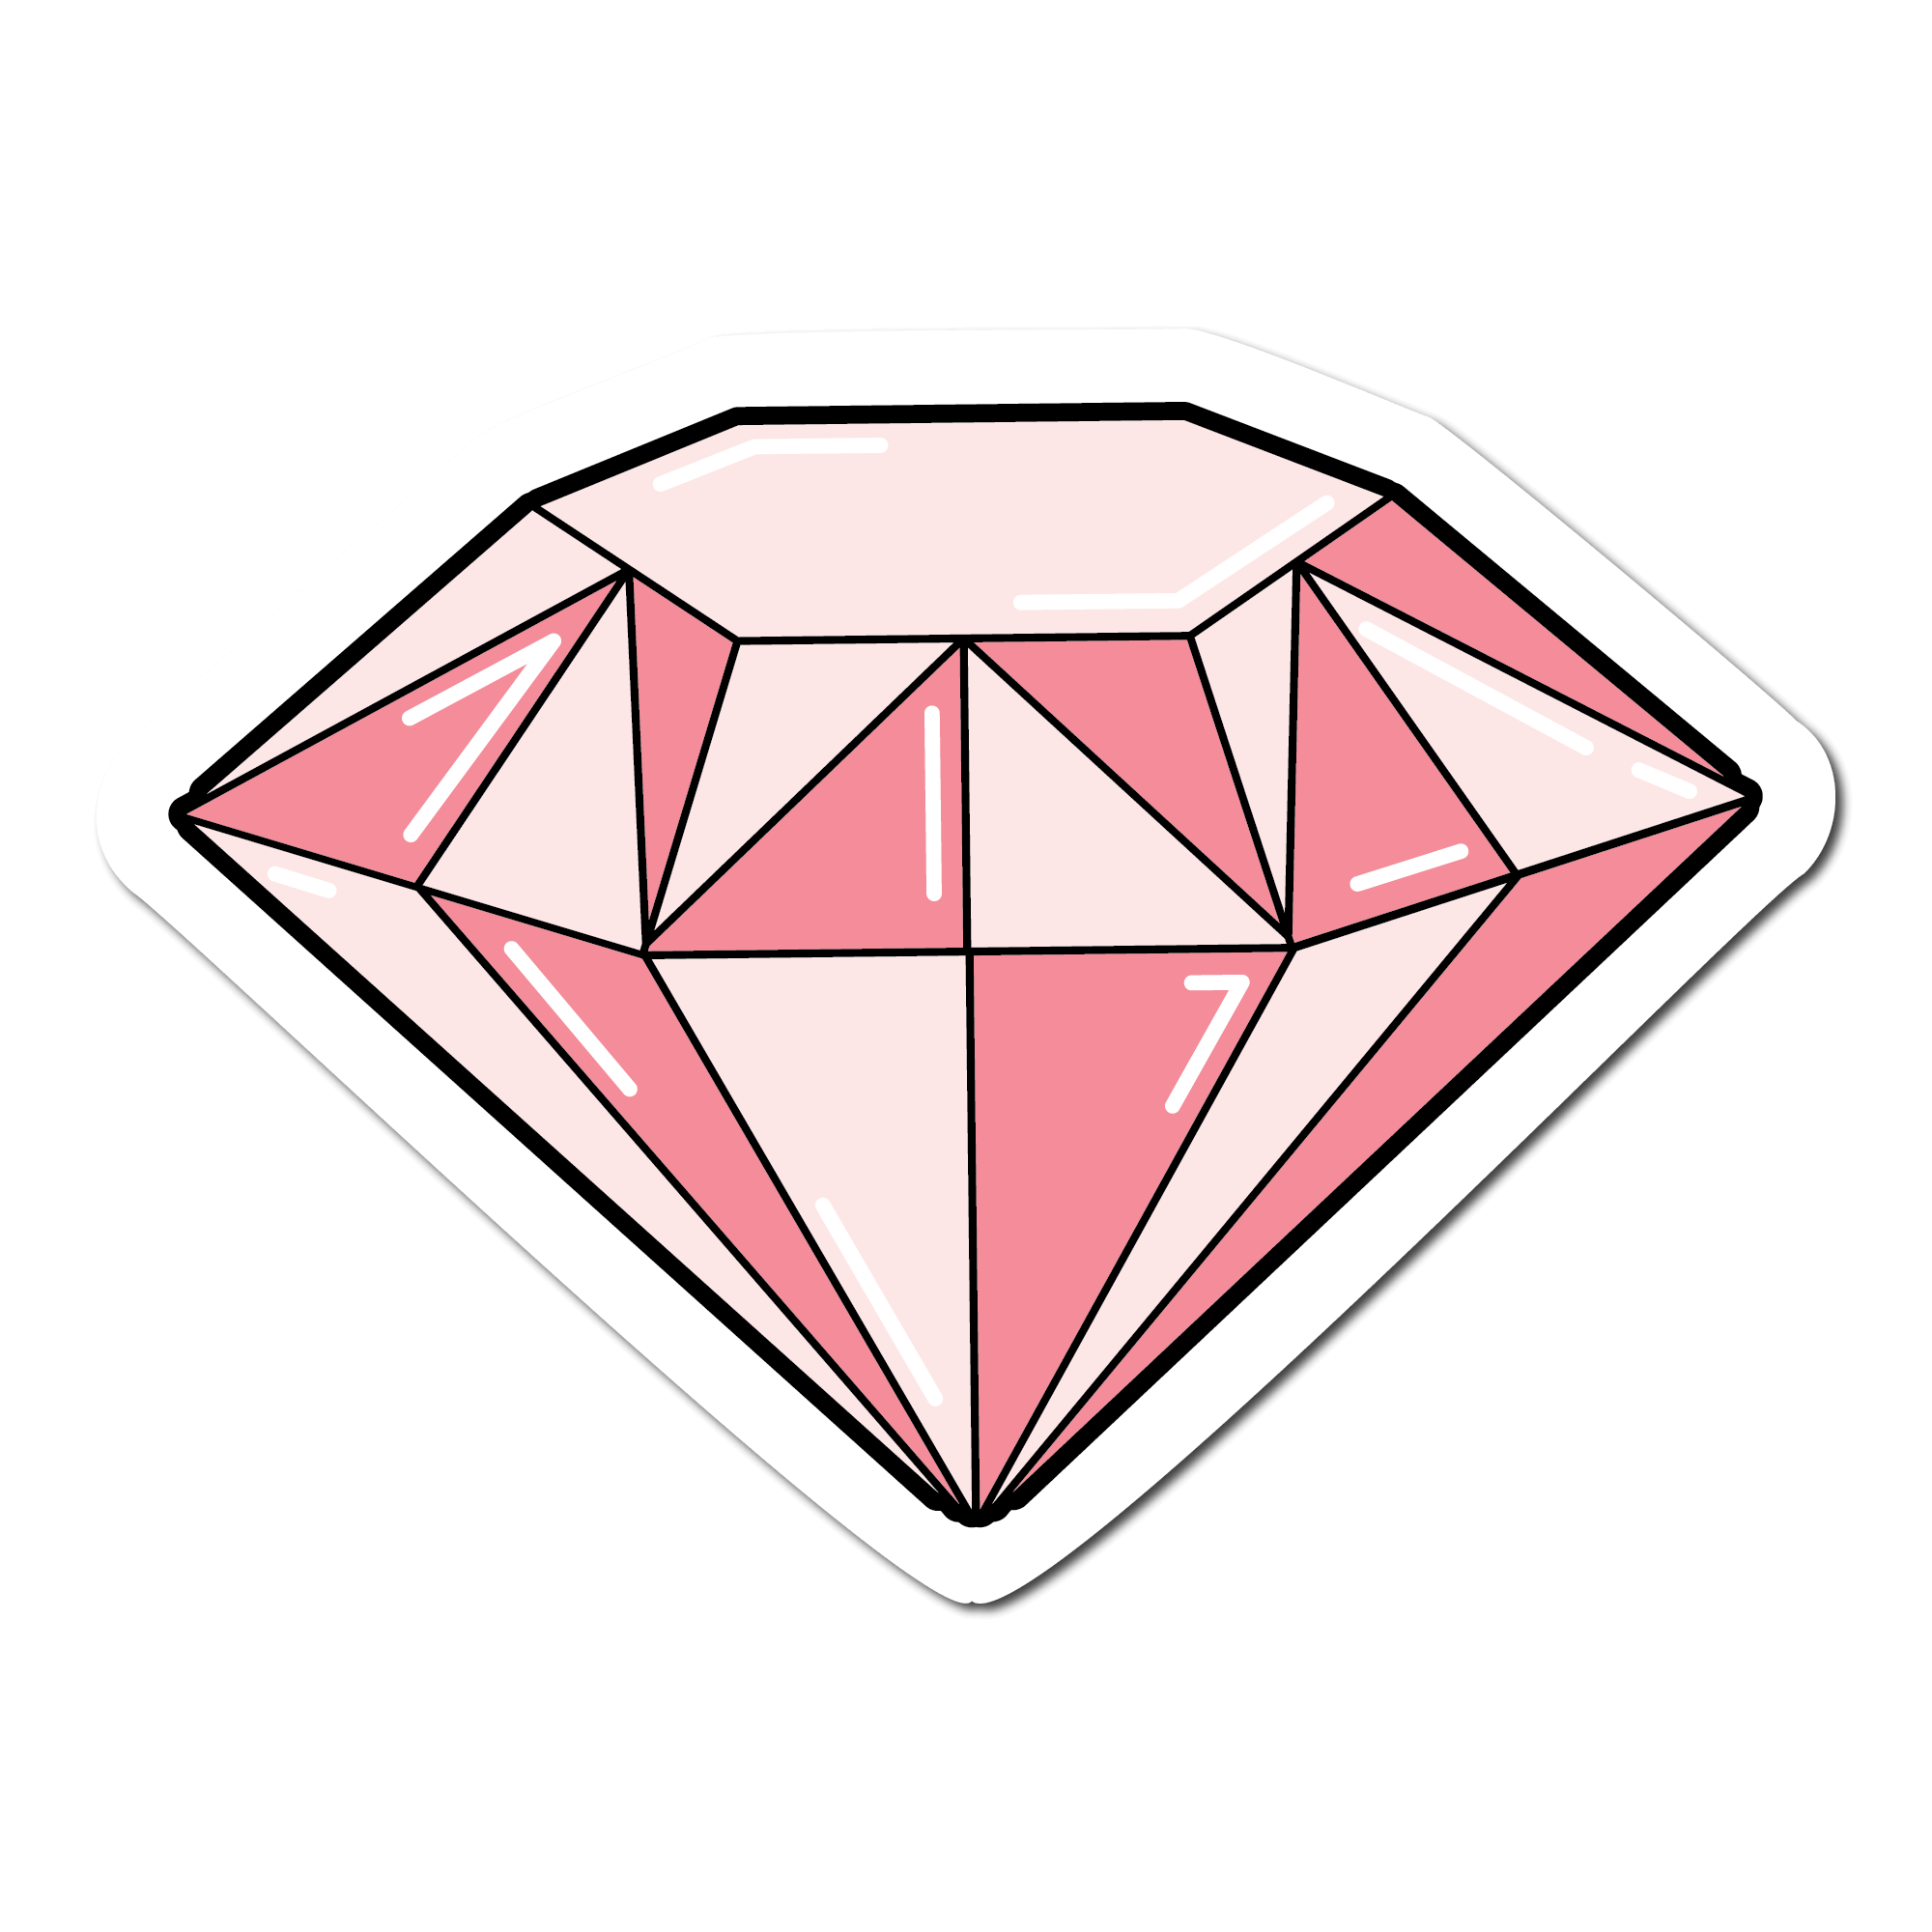 Small Sticker of a Pink Diamond for a Phone Case